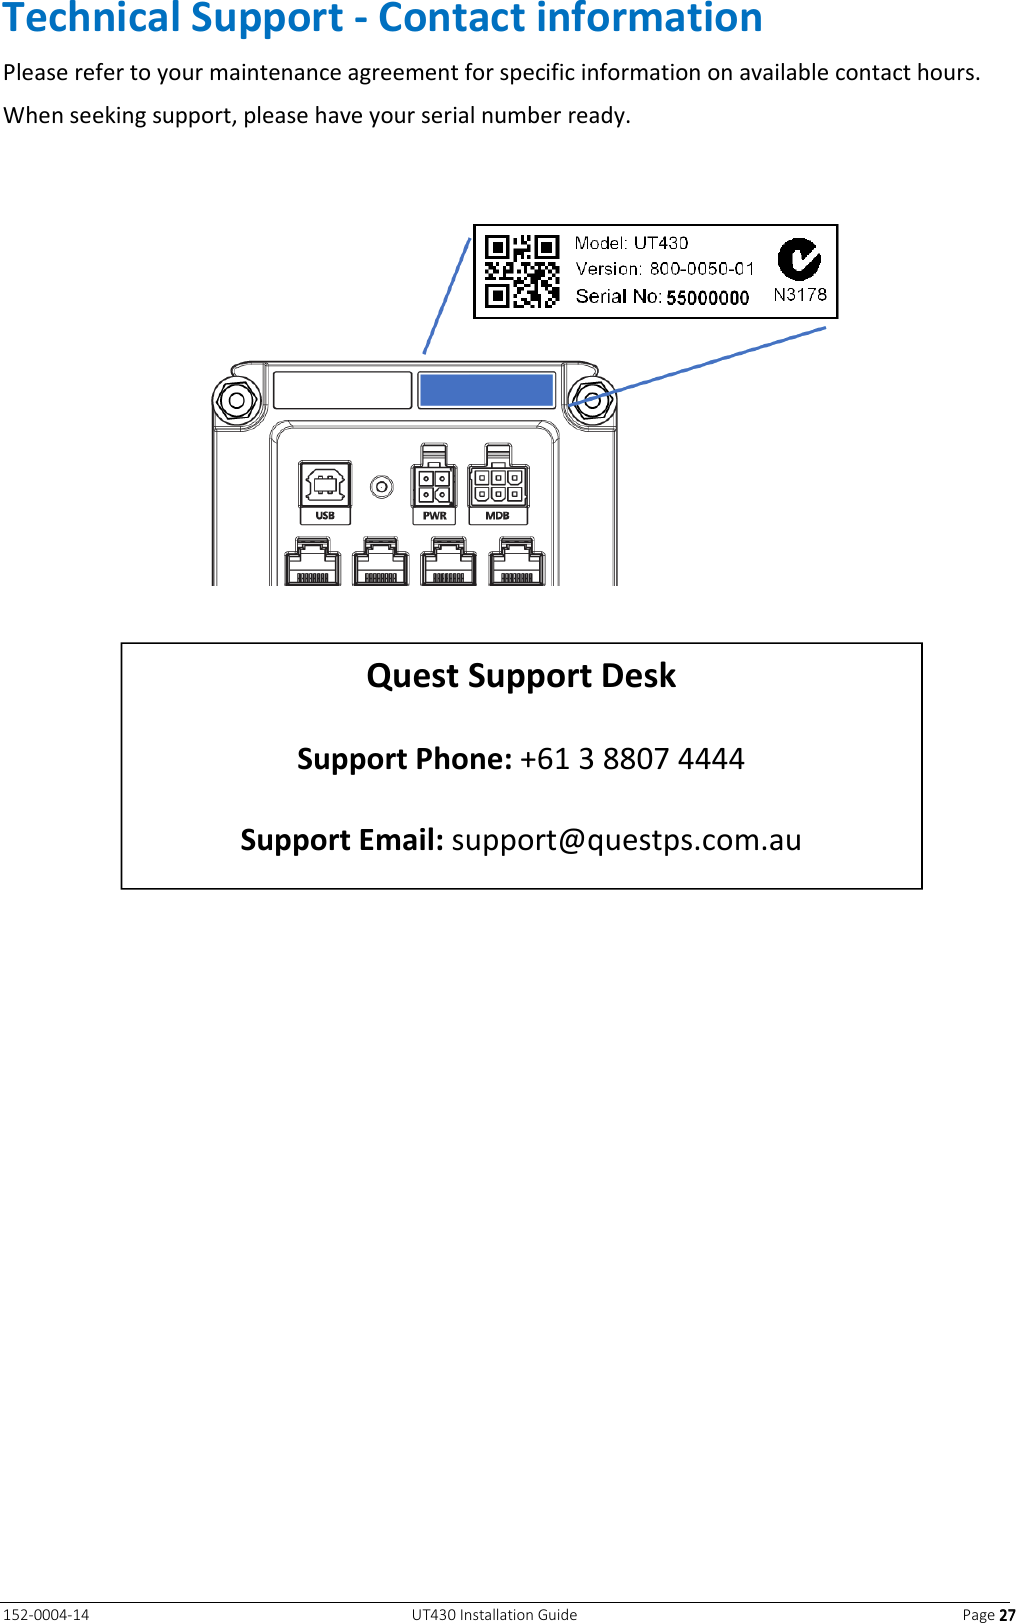   152-0004-14  UT430 Installation Guide  Page 27272727 Technical Support - Contact information Please refer to your maintenance agreement for specific information on available contact hours. When seeking support, please have your serial number ready.         Quest Support Desk  Support Phone: +61 3 8807 4444  Support Email: support@questps.com.au  